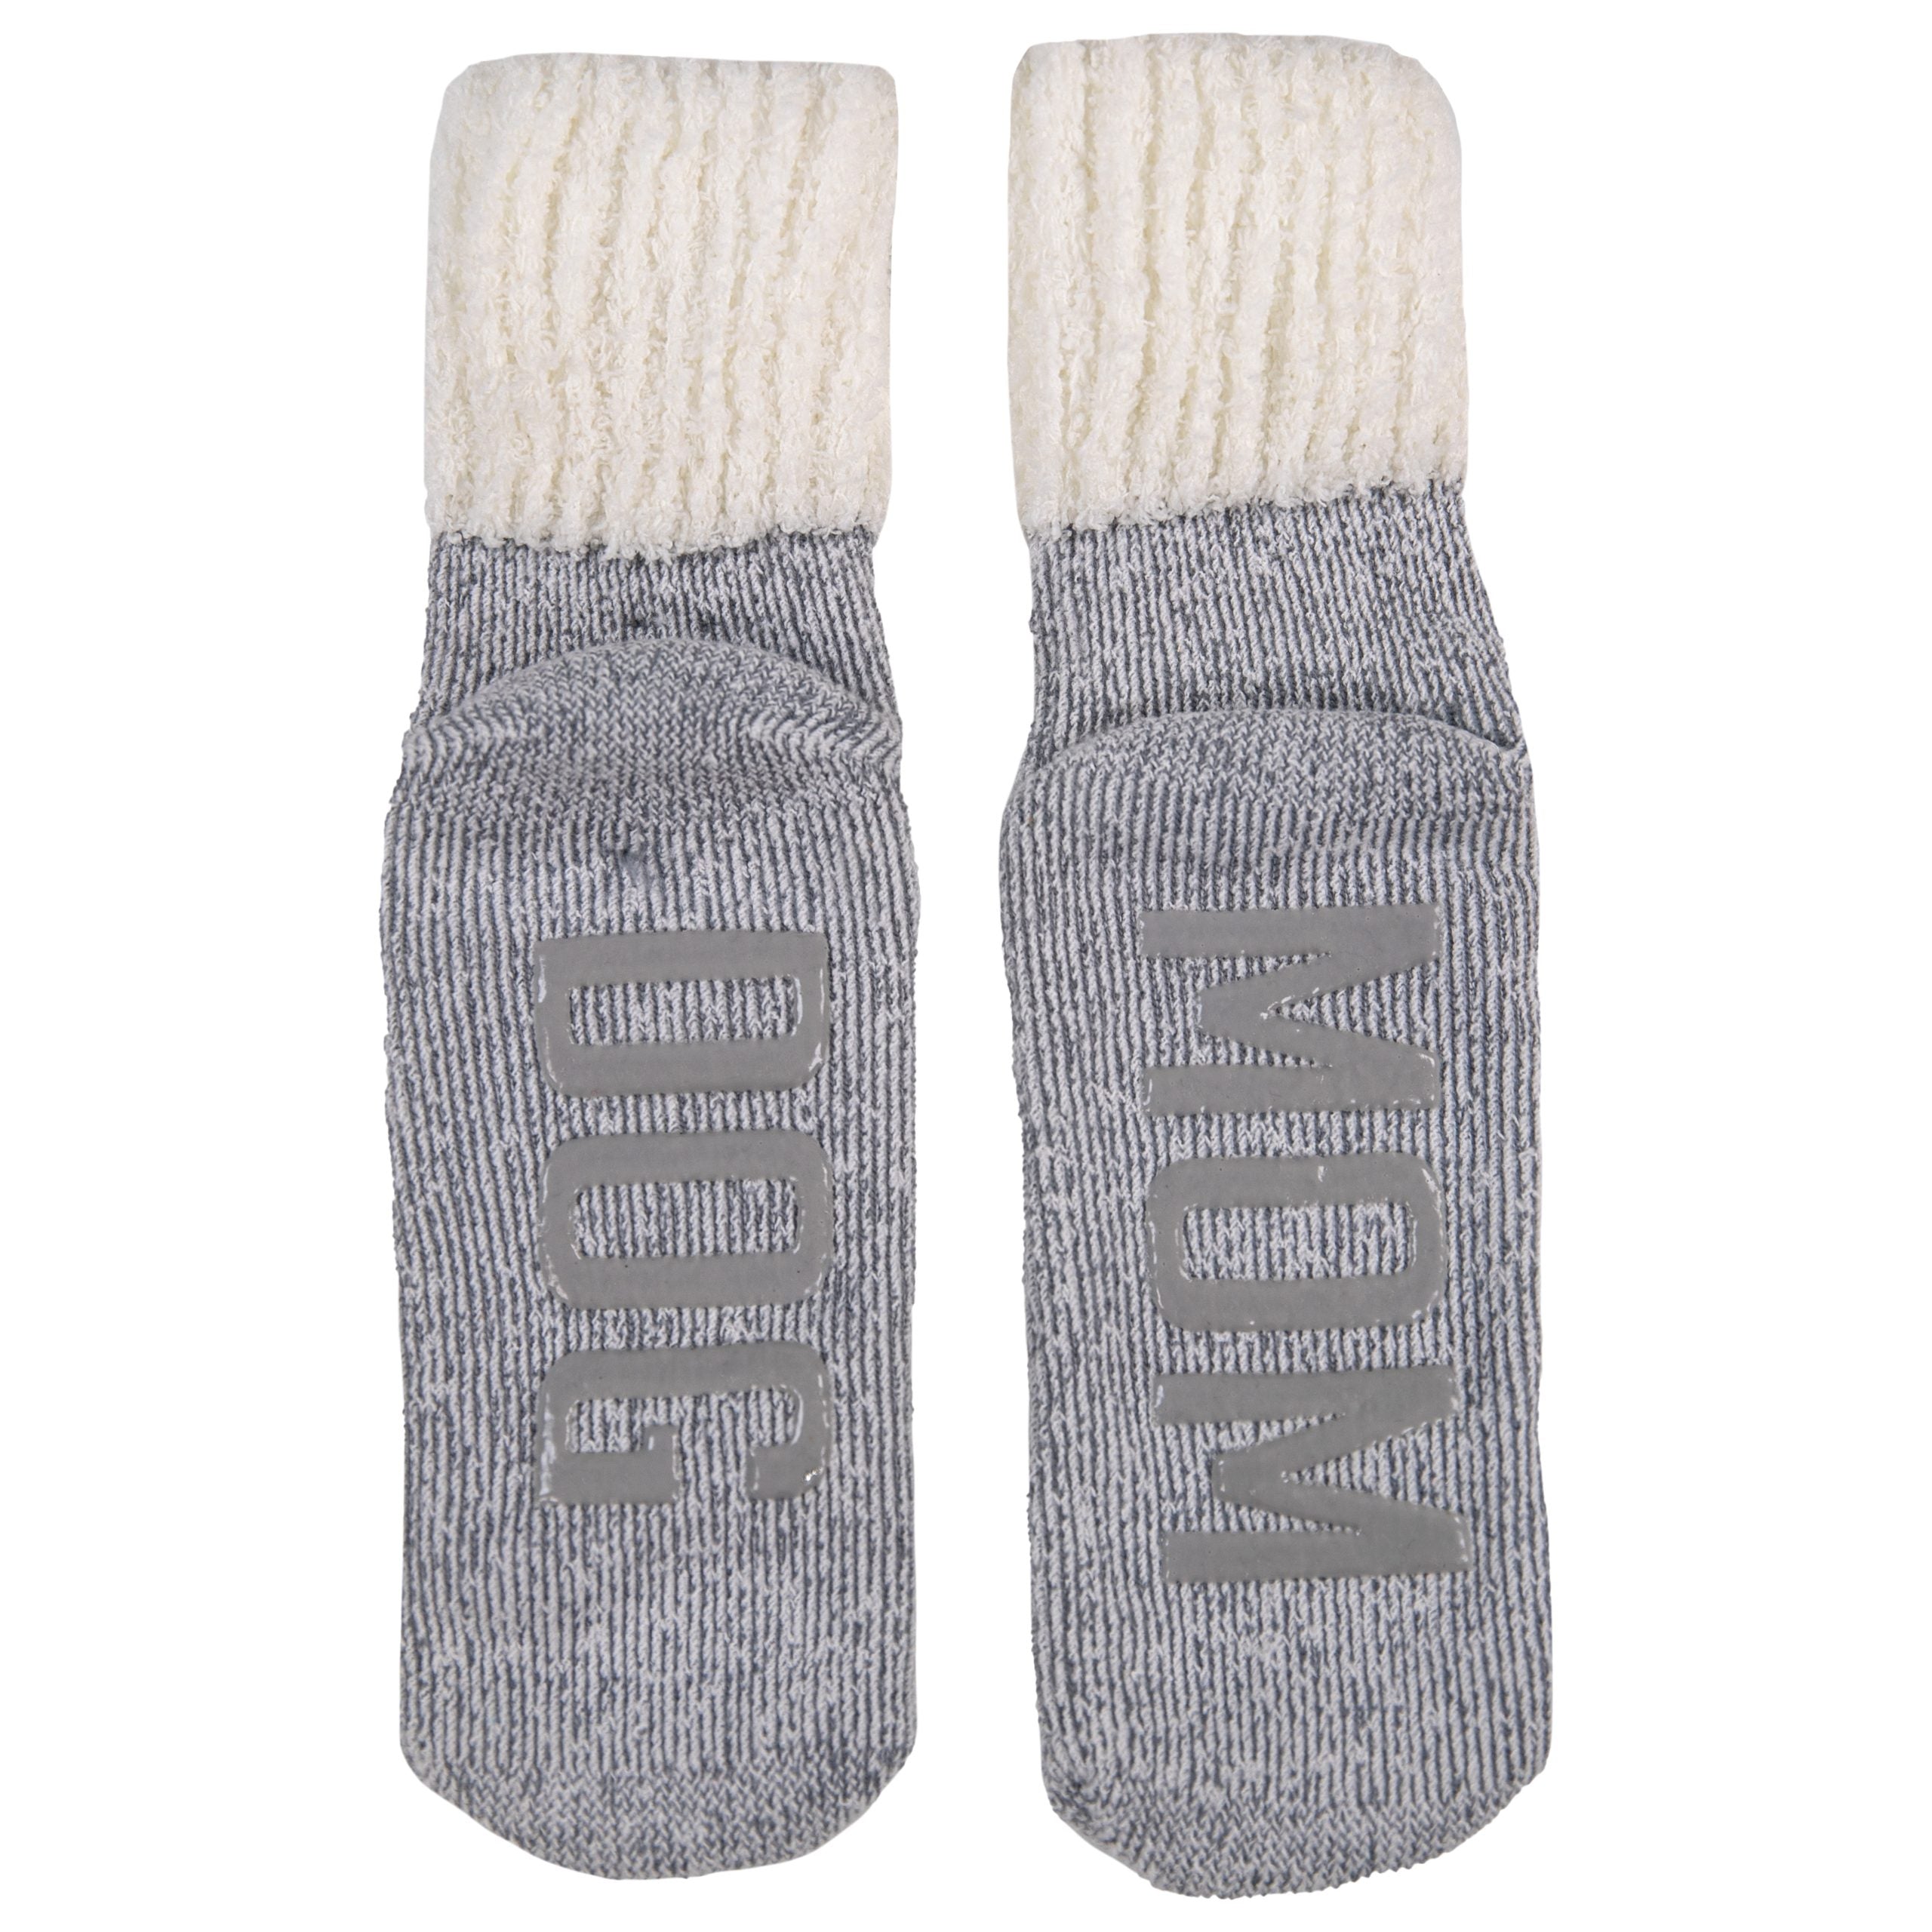 Non slip socks by Simply southern